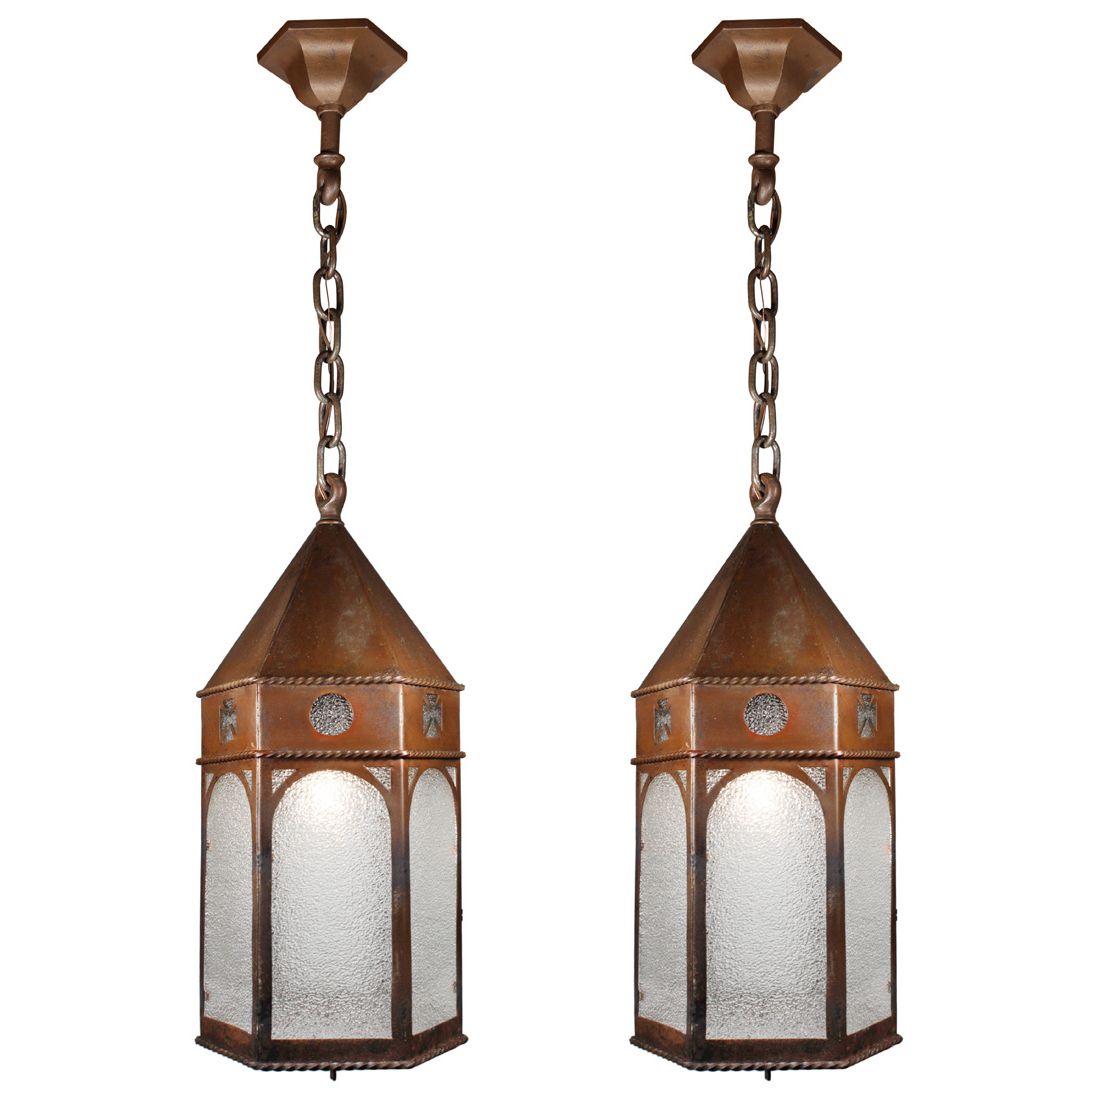 Vintage Copper Lantern Chandeliers With Regard To 2019 Matching Antique Bronze Lantern Pendant Lights With Granite Glass – Antique  Lighting, Ceiling, Ceiling Mounted, Exterior, Lanterns, Lighting,  Pair/multiple Chandeliers, Pendant Lighting, Recent Arrivals – The  Preservation Station (View 9 of 10)